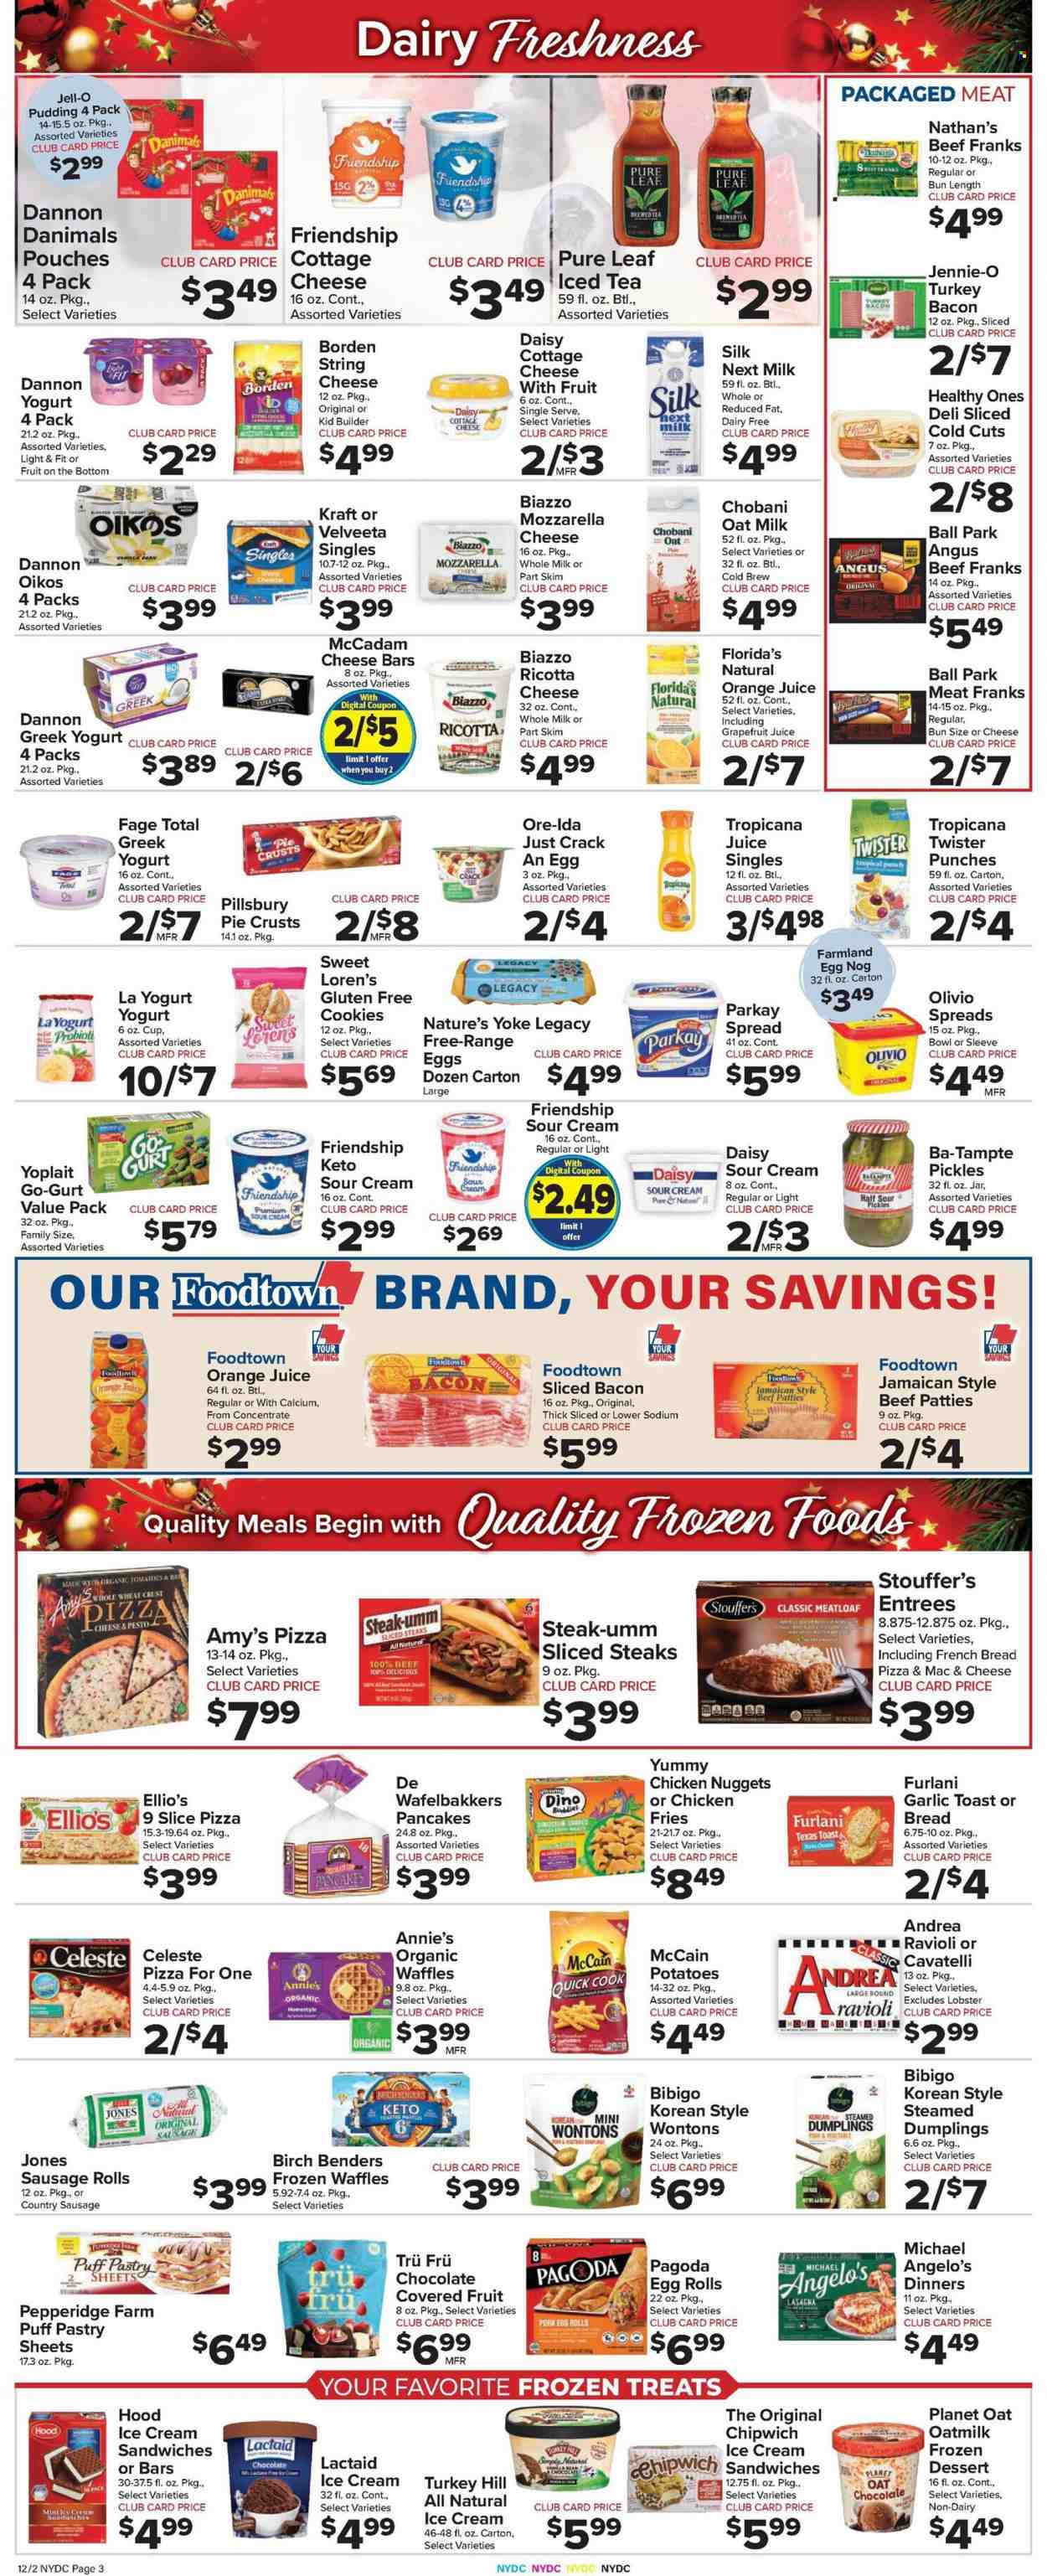 thumbnail - Foodtown Flyer - 12/02/2022 - 12/08/2022 - Sales products - bread, sausage rolls, french bread, waffles, potatoes, lobster, ravioli, pizza, nuggets, egg rolls, pancakes, Pillsbury, chicken nuggets, dumplings, meatloaf, lasagna meal, Annie's, Kraft®, bacon, turkey bacon, sausage, olivio spreads, cottage cheese, cream cheese, Lactaid, ricotta, sandwich slices, string cheese, cheddar, Kraft Singles, greek yoghurt, pudding, yoghurt, Oikos, Yoplait, Chobani, Dannon, Danimals, milk, Silk, oat milk, sour cream, puff pastry, ice cream, ice cream sandwich, Stouffer's, McCain, potato fries, Ore-Ida, Celeste, cookies, Florida's Natural, pie crust, Jell-O, pickles, pesto, orange juice, juice, ice tea, fruit punch, Pure Leaf, red wine, wine, beef meat, steak, Guess, pot, bowl, pin, calcium. Page 3.